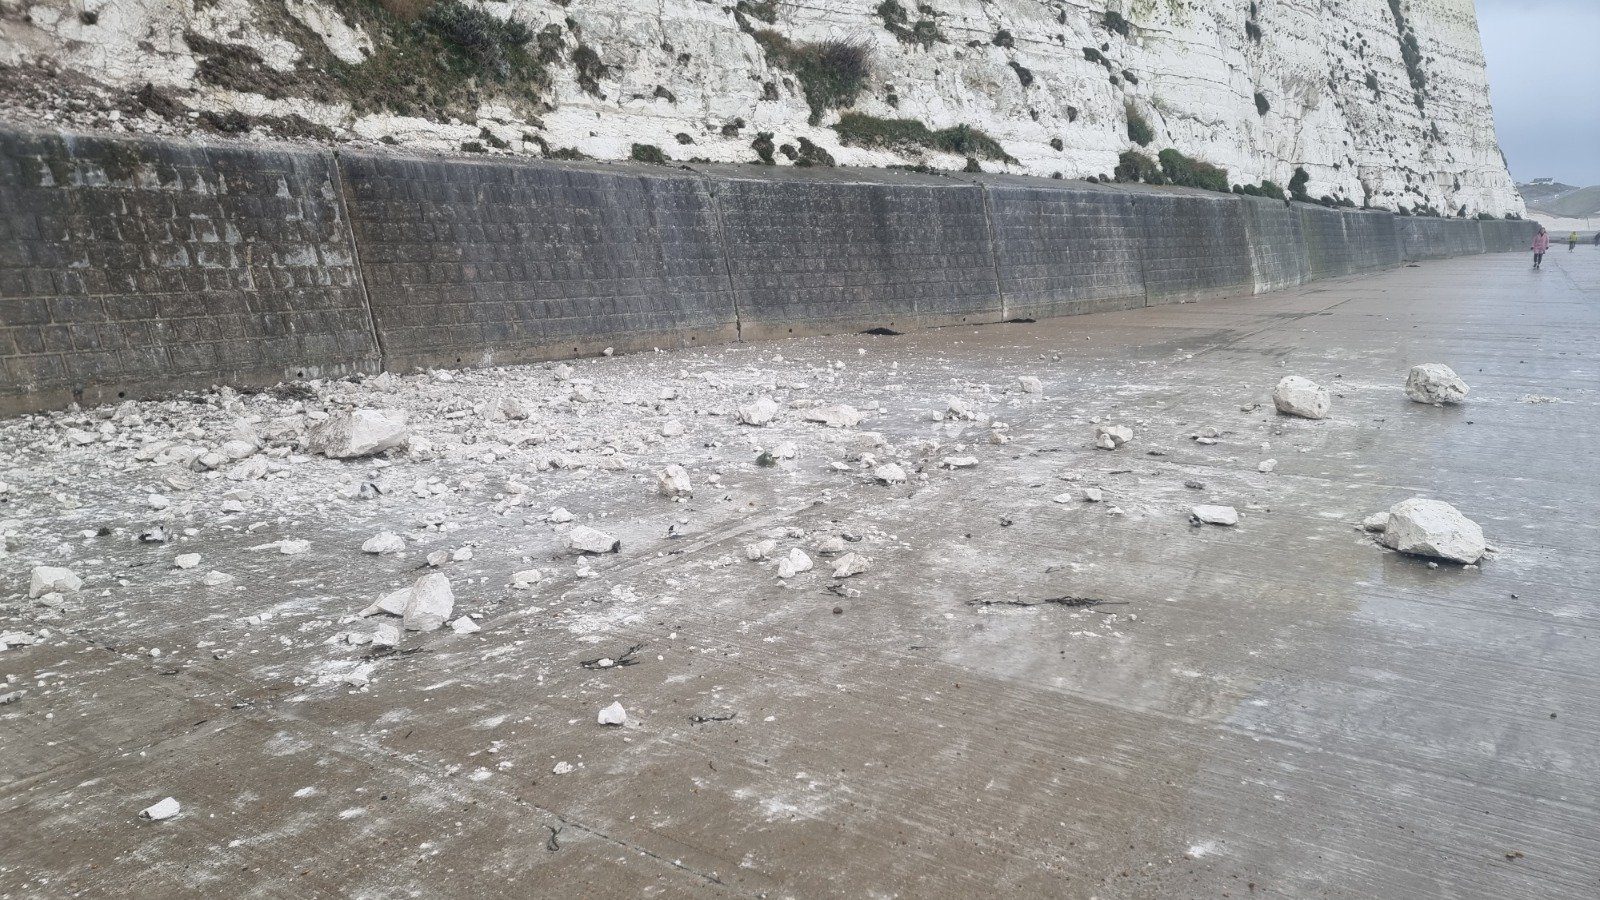 Undercliff Walk Temporarily Closed After Recent Chalk Fall